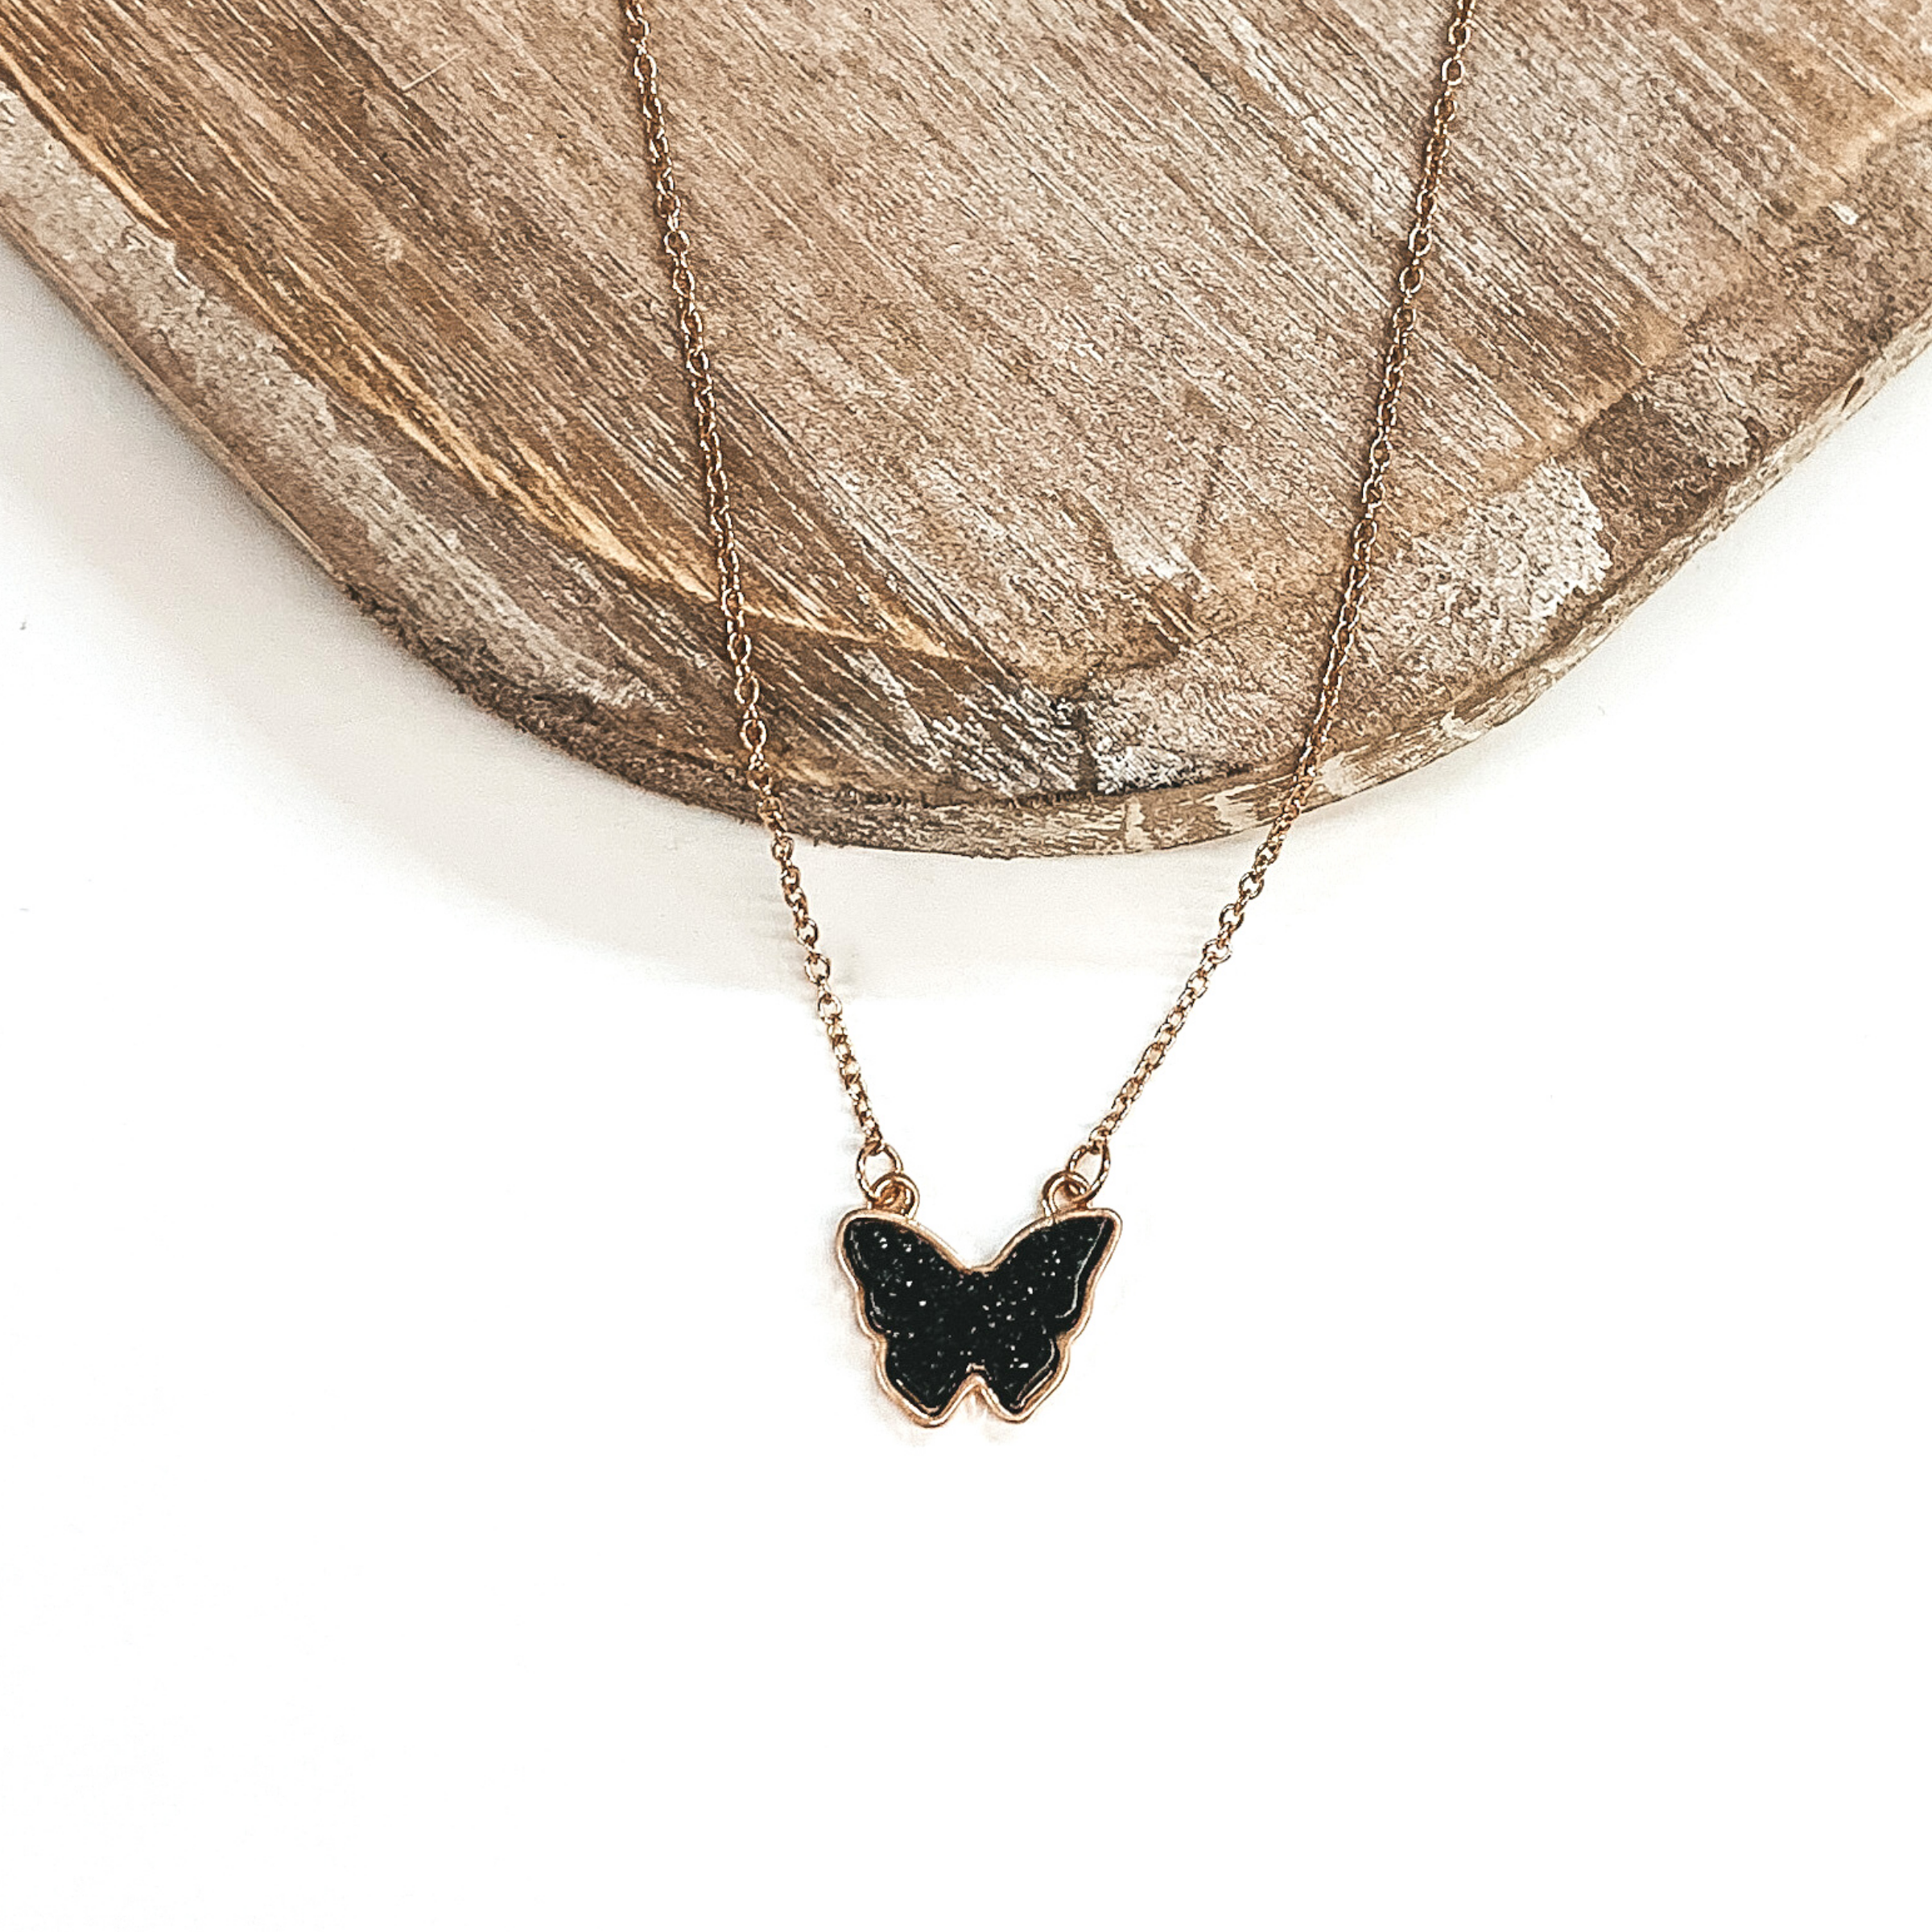 Gold necklace with black druzy butterfly pendant. Pictured on  a white and brown background. 